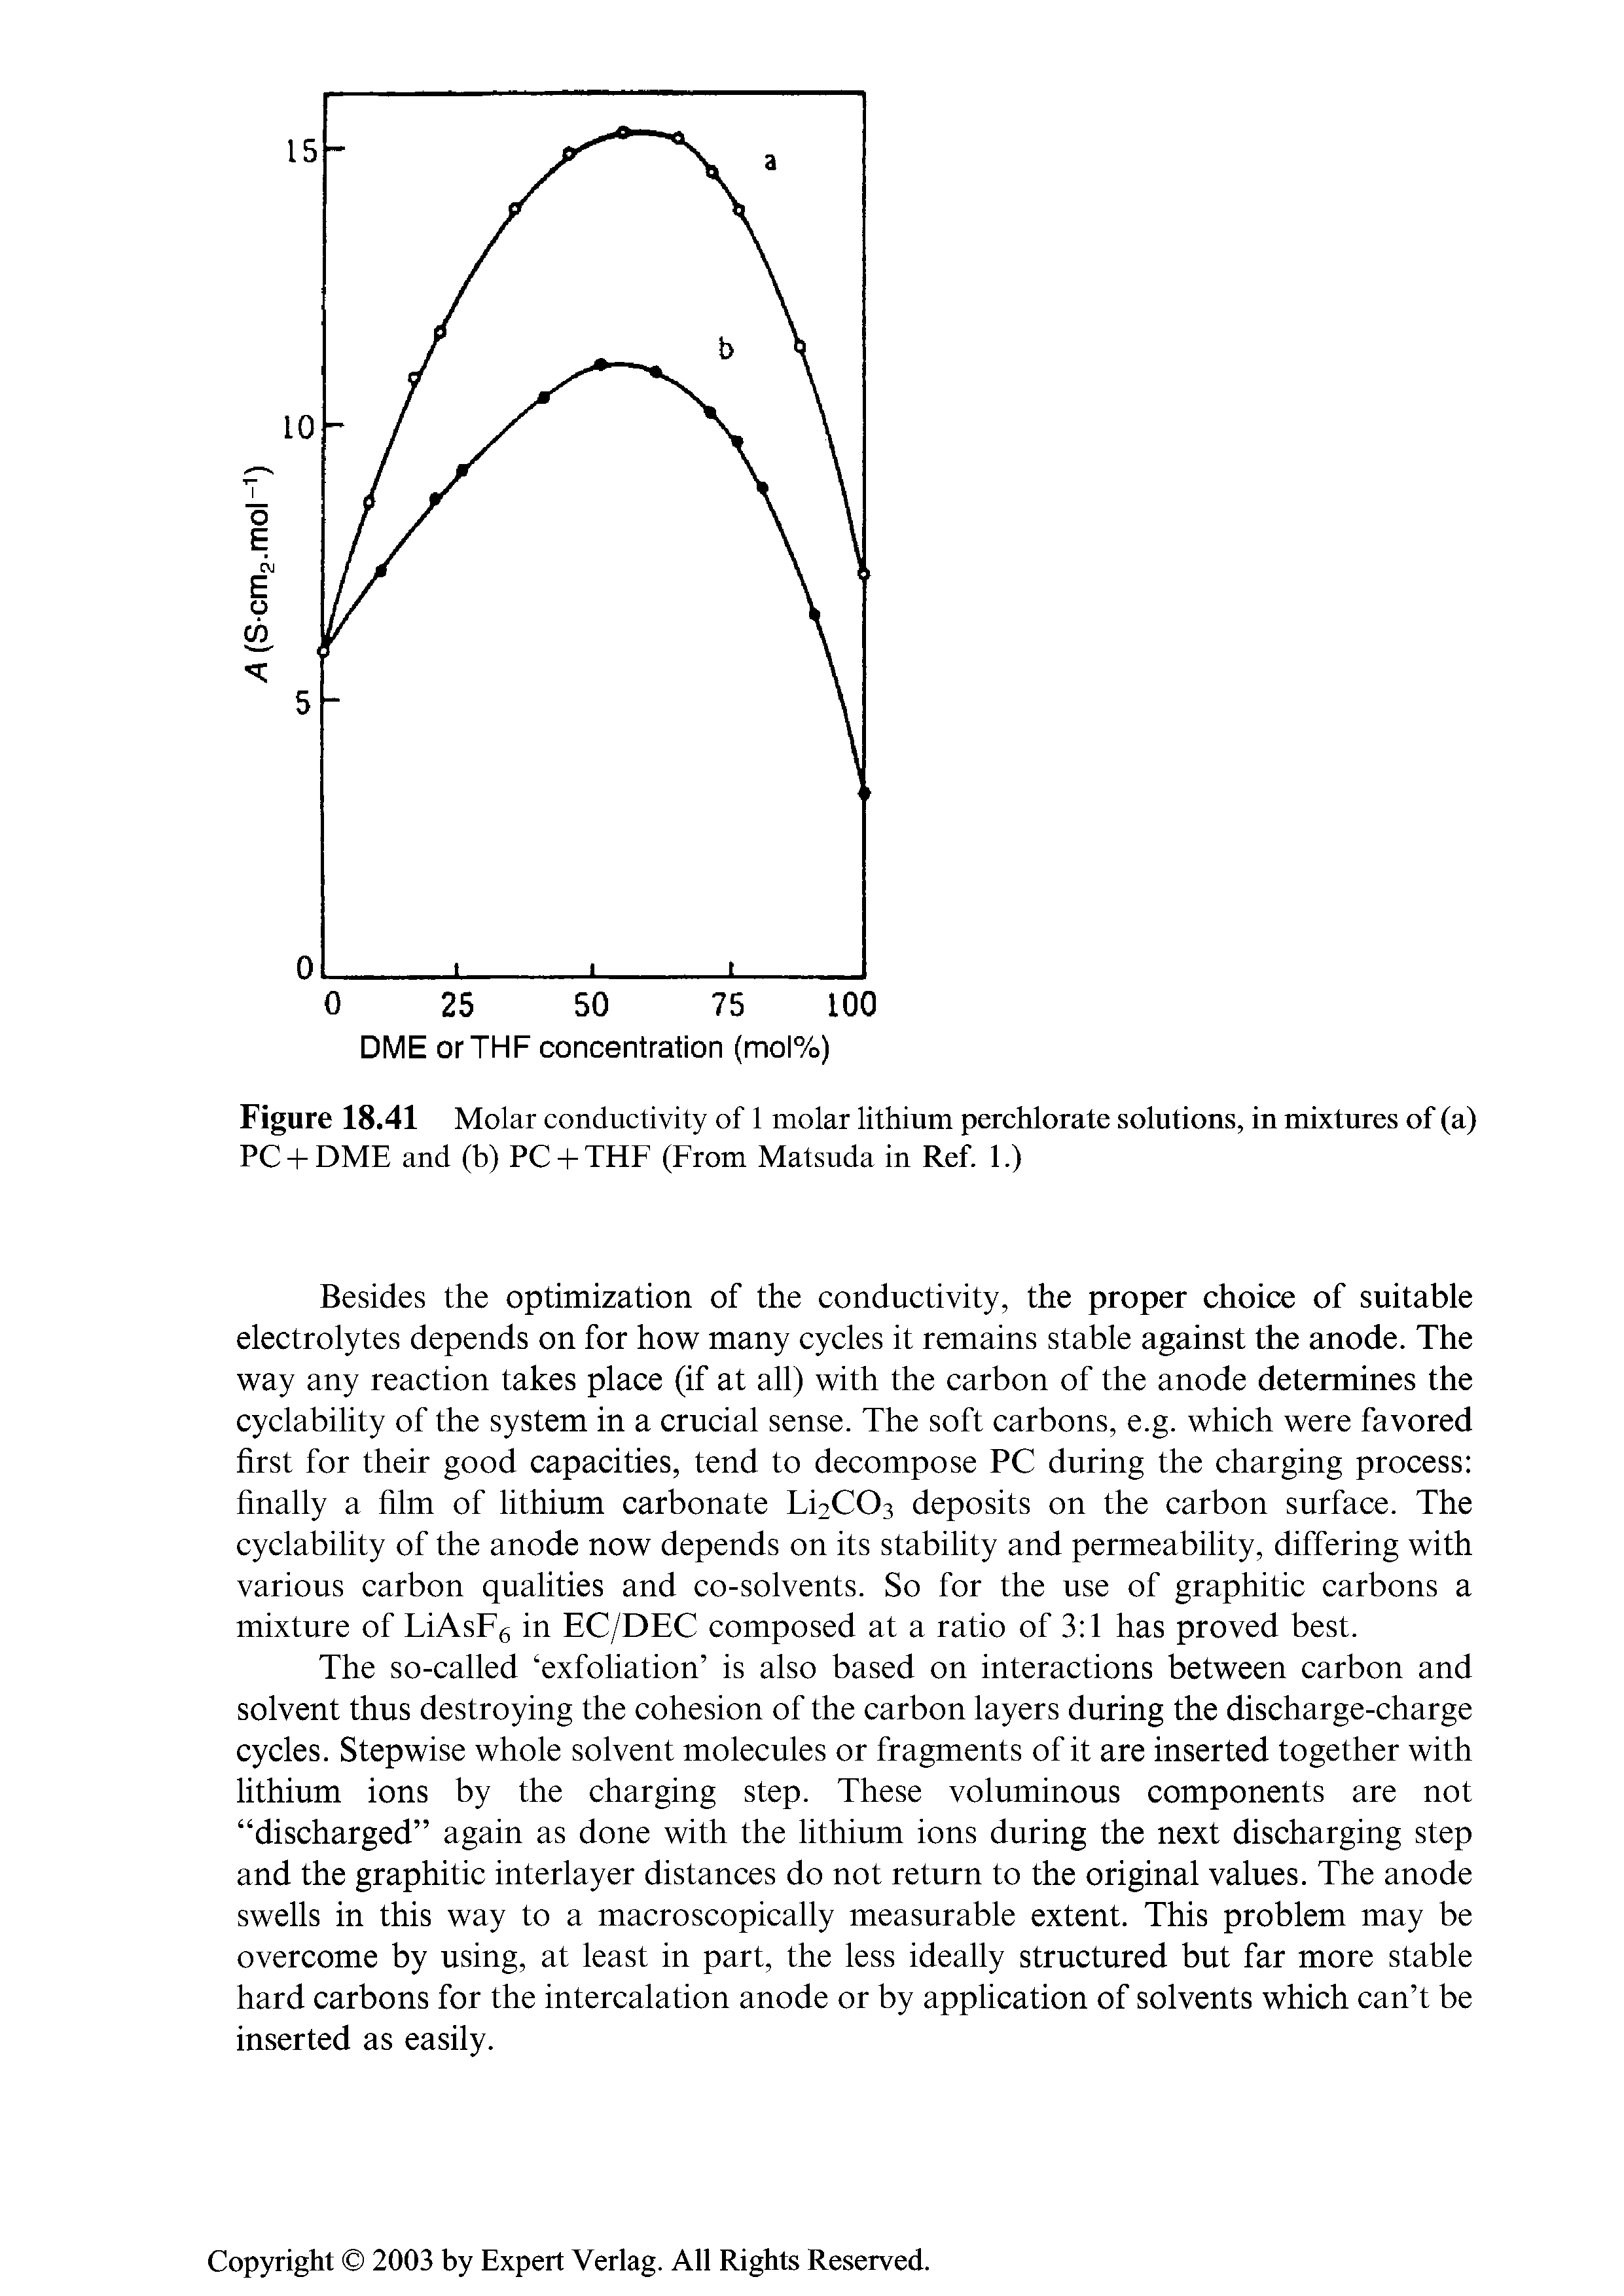 Figure 18.41 Molar conductivity of 1 molar lithium perchlorate solutions, in mixtures of (a) PC + DME and (b) PC + THE (From Matsuda in Ref. 1.)...